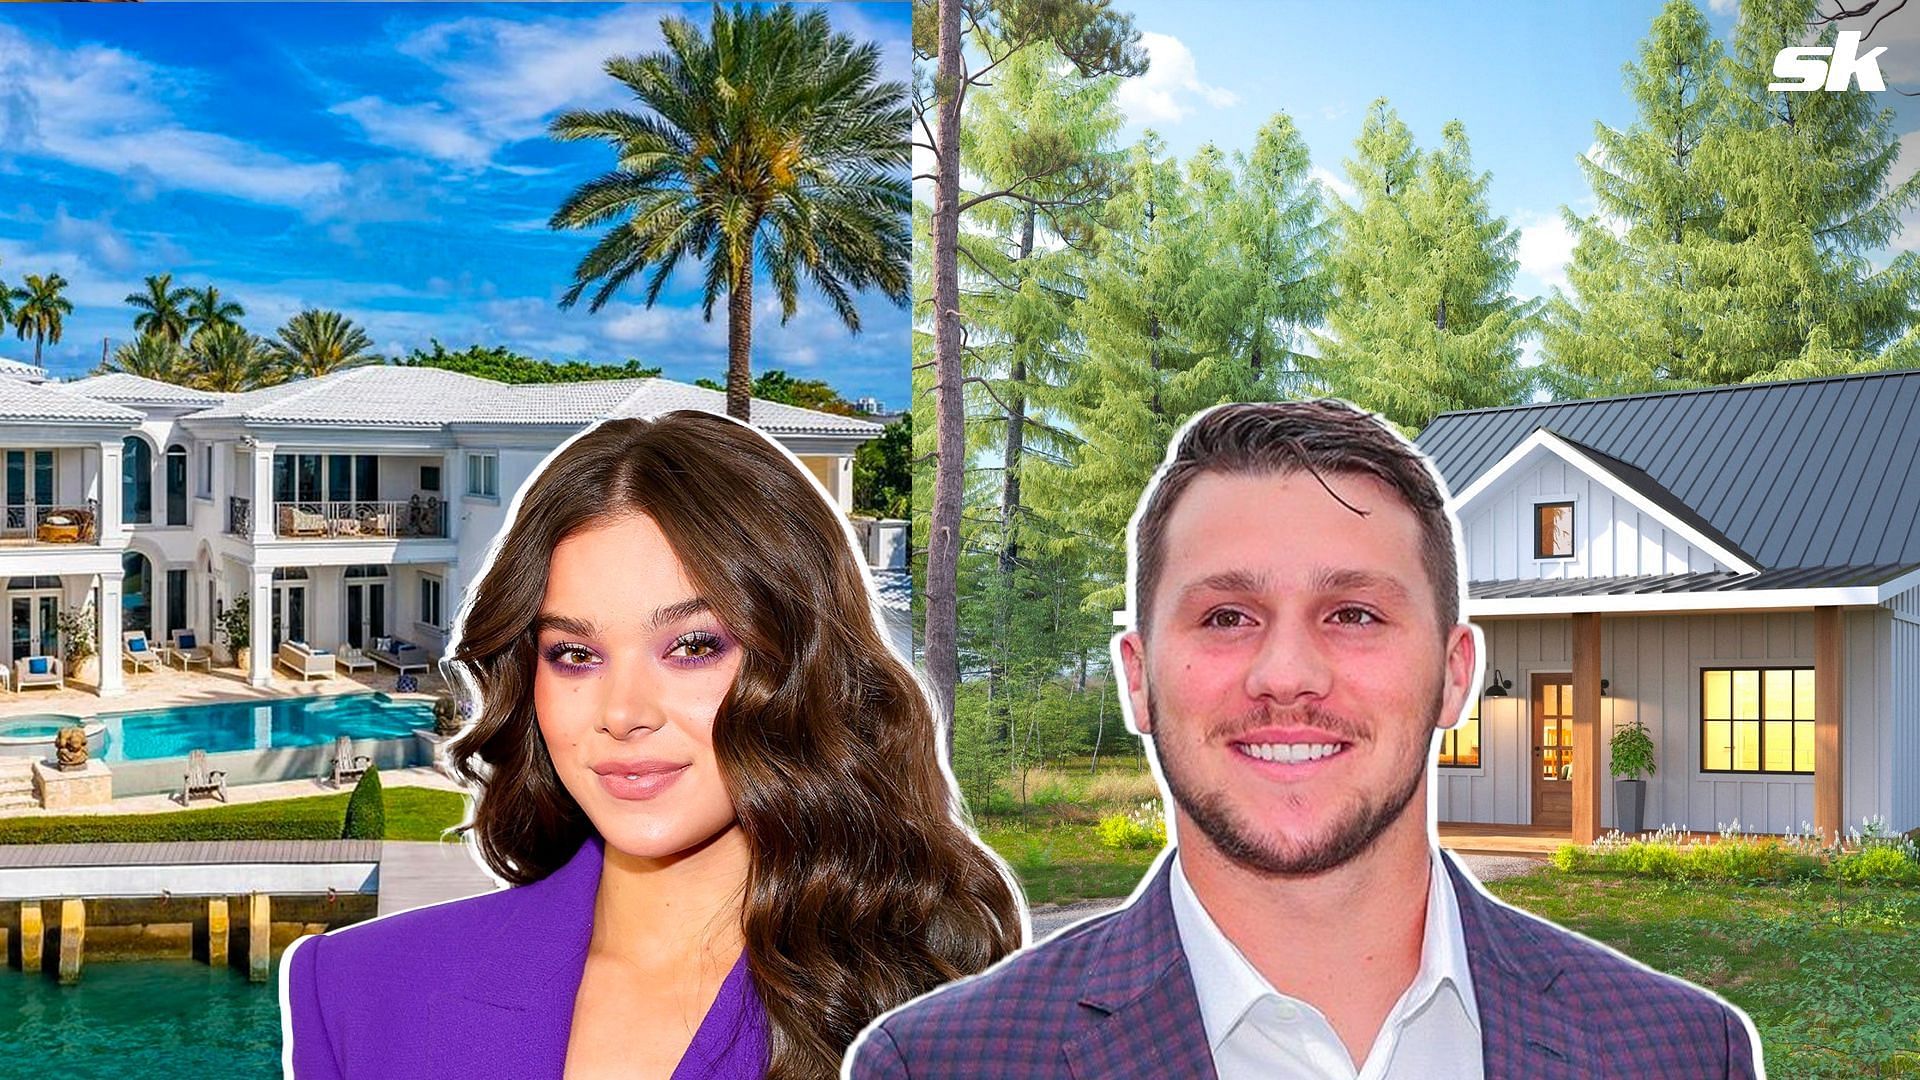 Josh Allen gets trolled by Reddit users for buying a house close to his alleged new GF. 